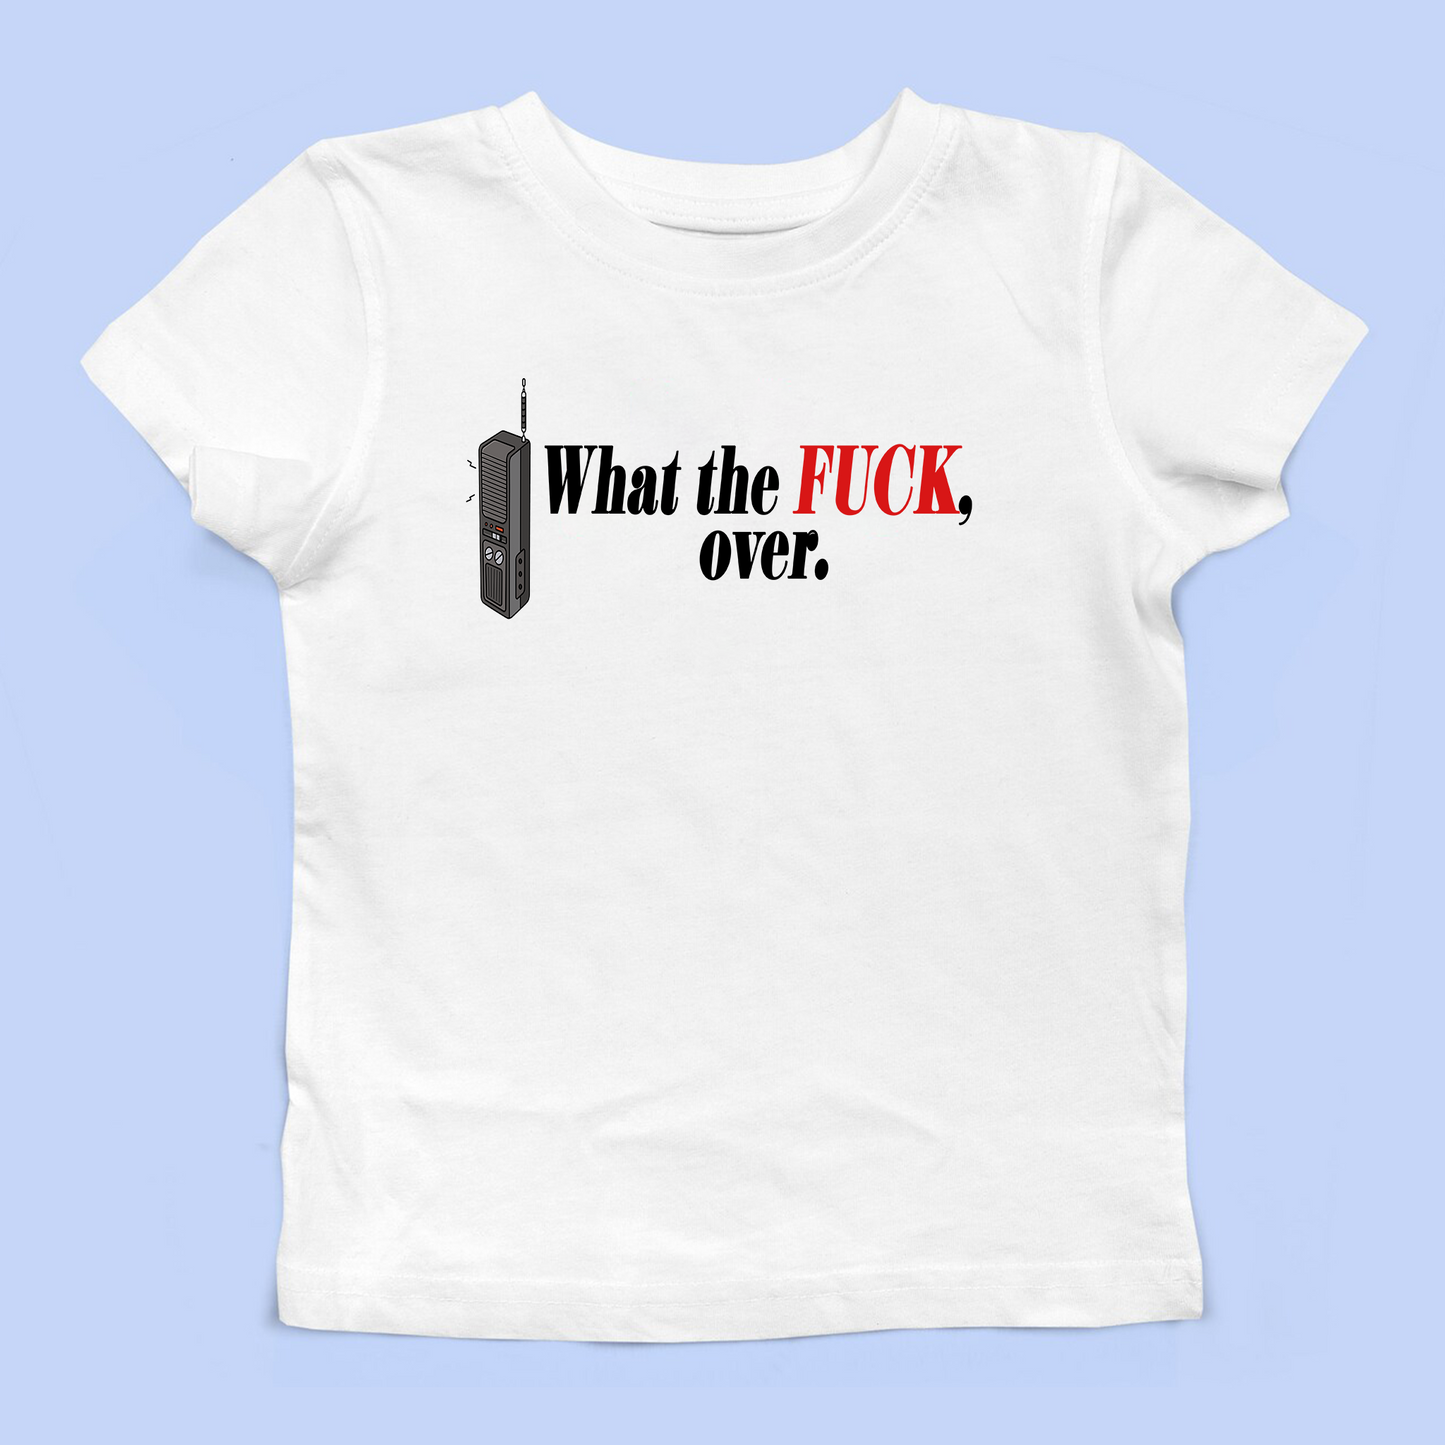 What The Fuck, Over. Baby Tee